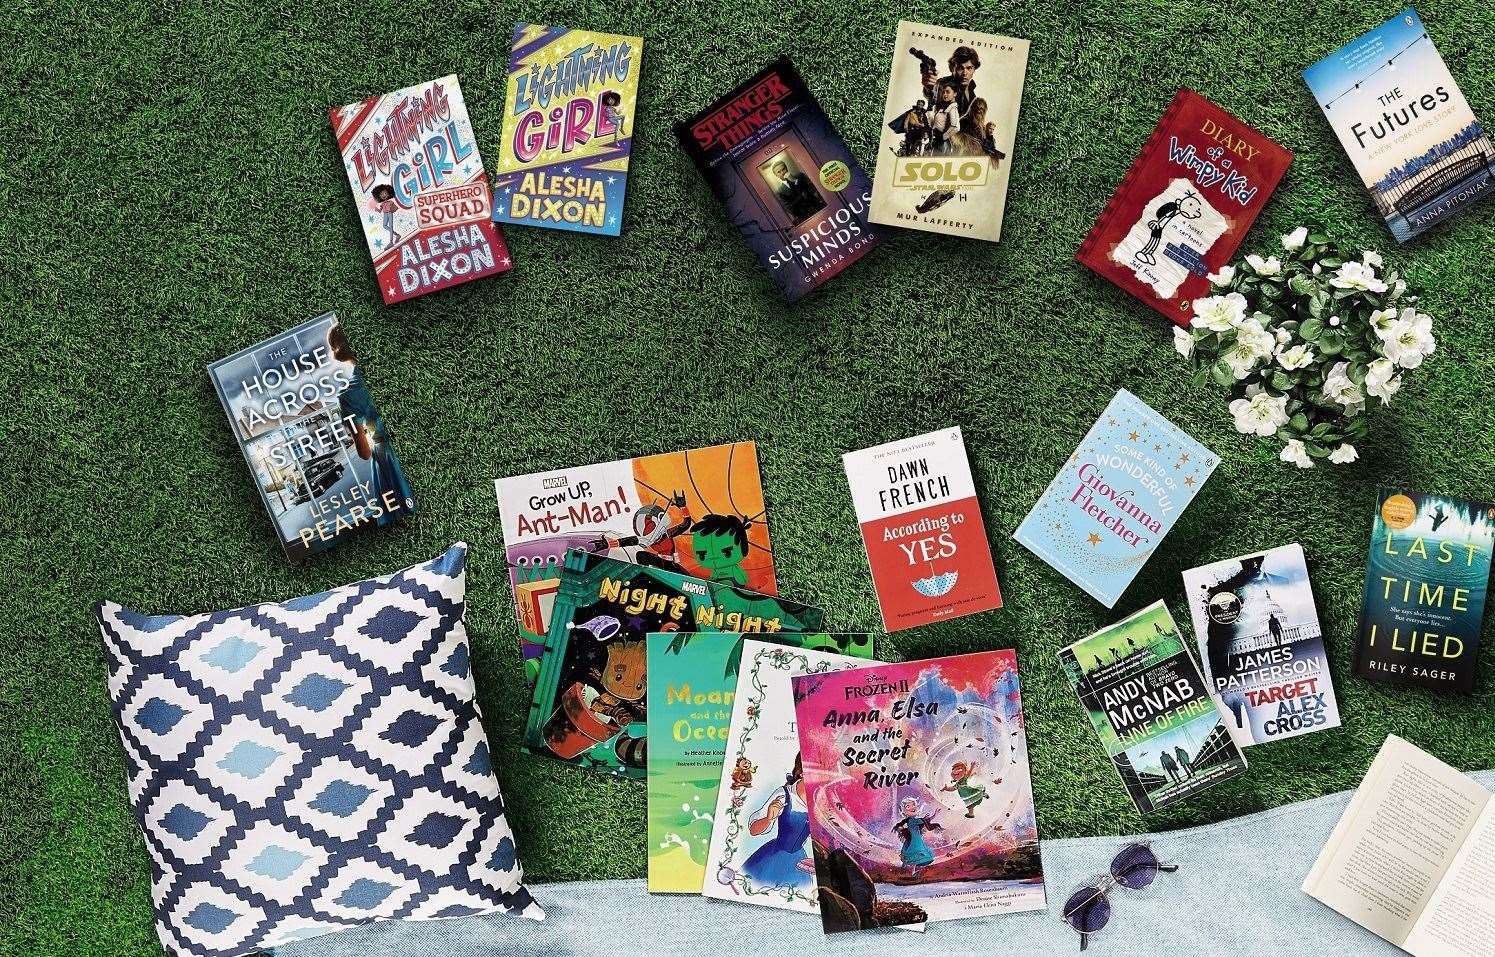 Aldi has launched its first ever Summer Reading range